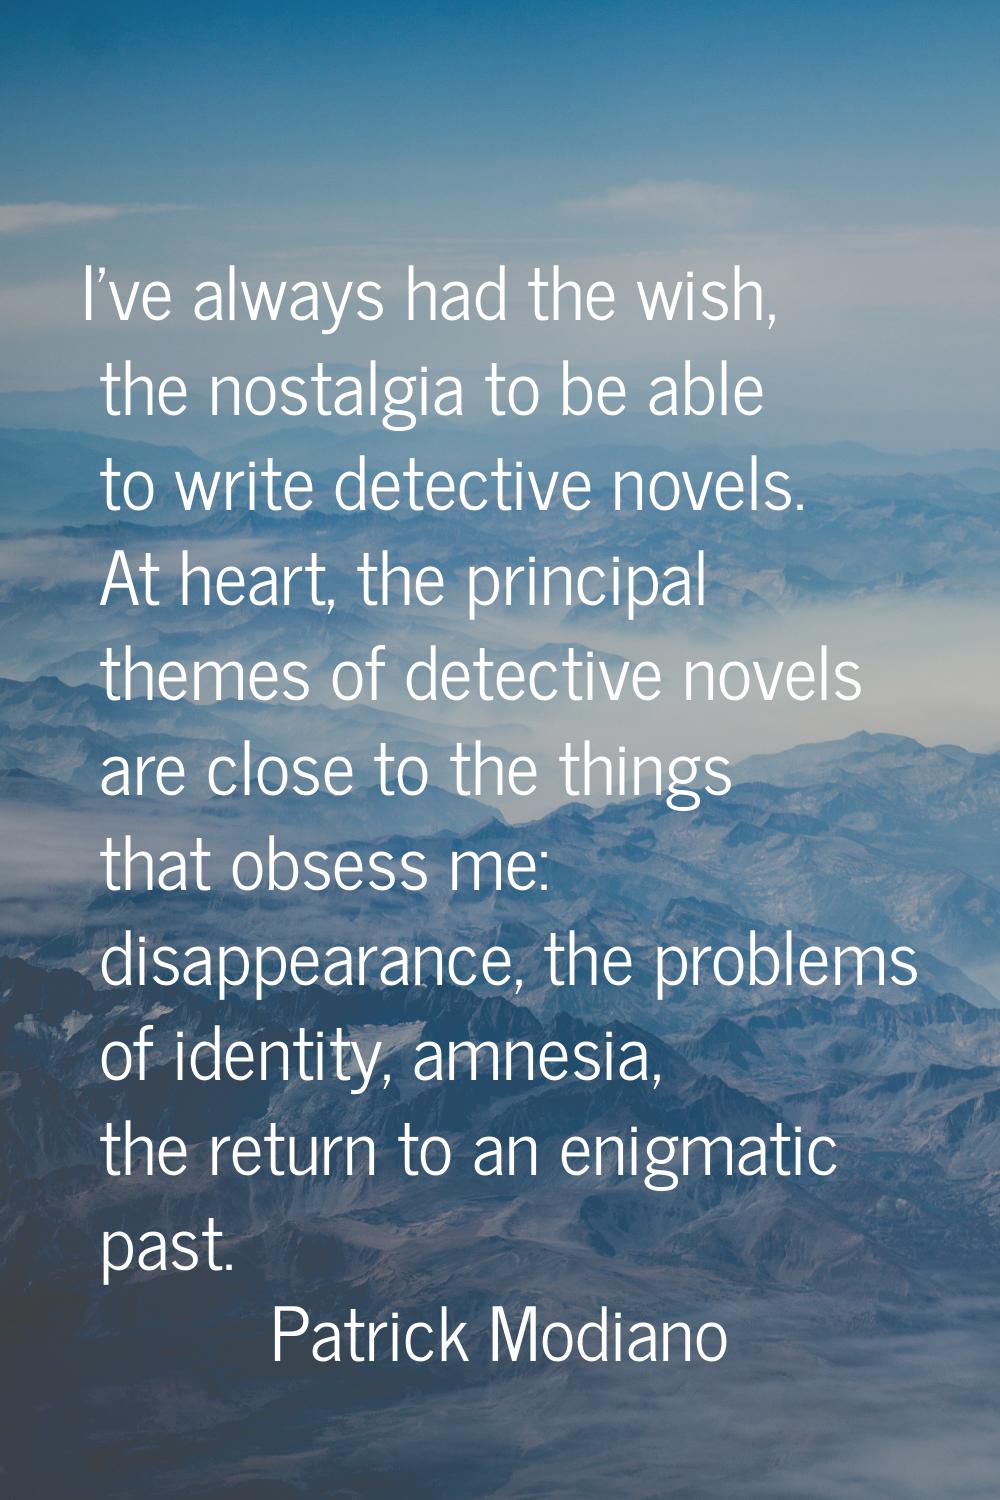 I've always had the wish, the nostalgia to be able to write detective novels. At heart, the princip